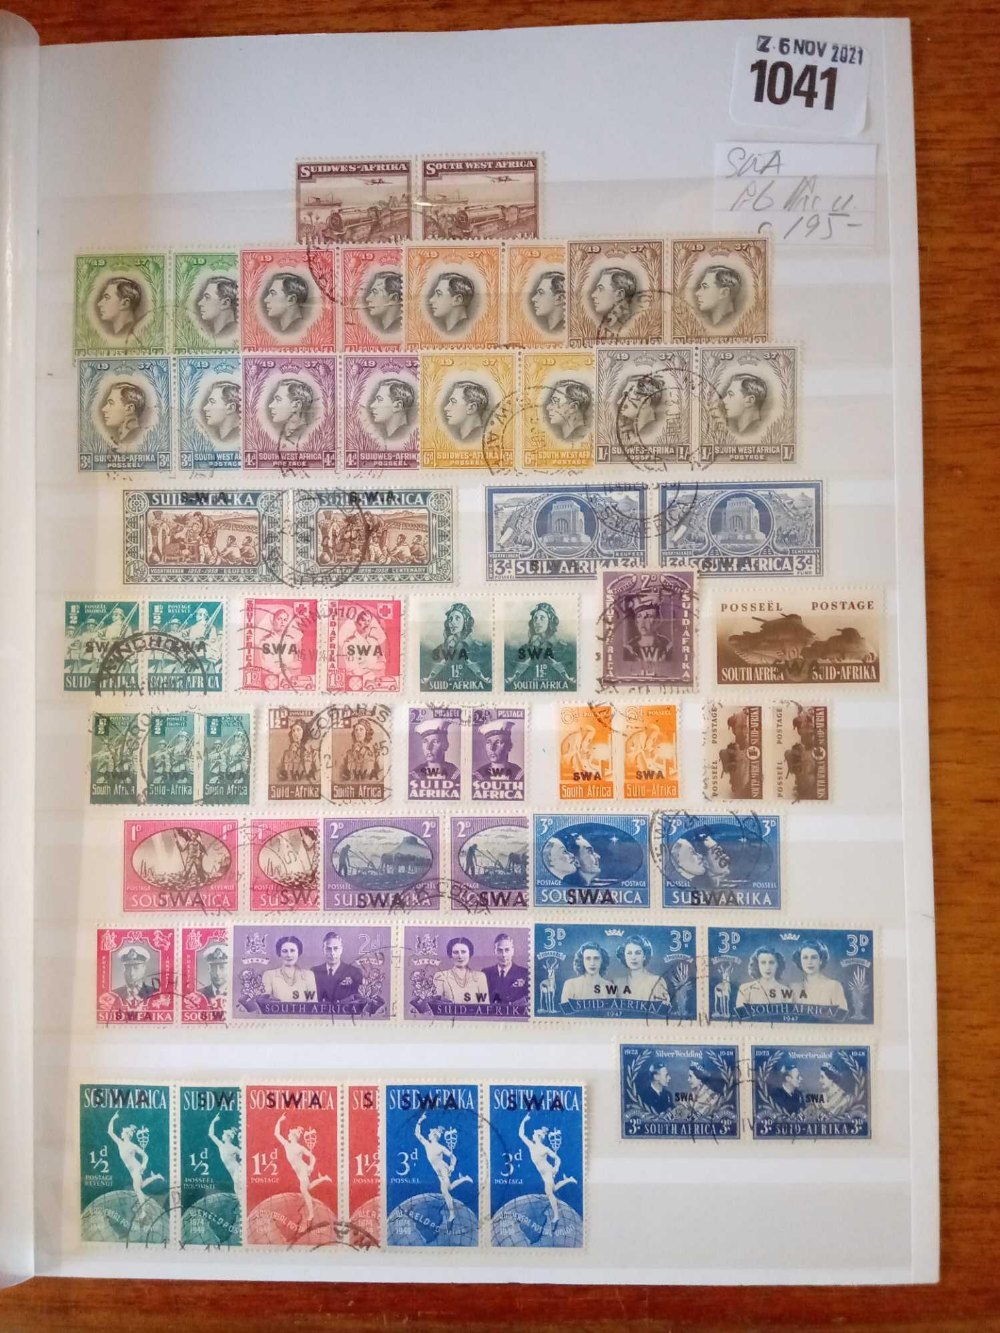 SOUTH WEST AFRICA. George VI used issues, most fine. Cat £195